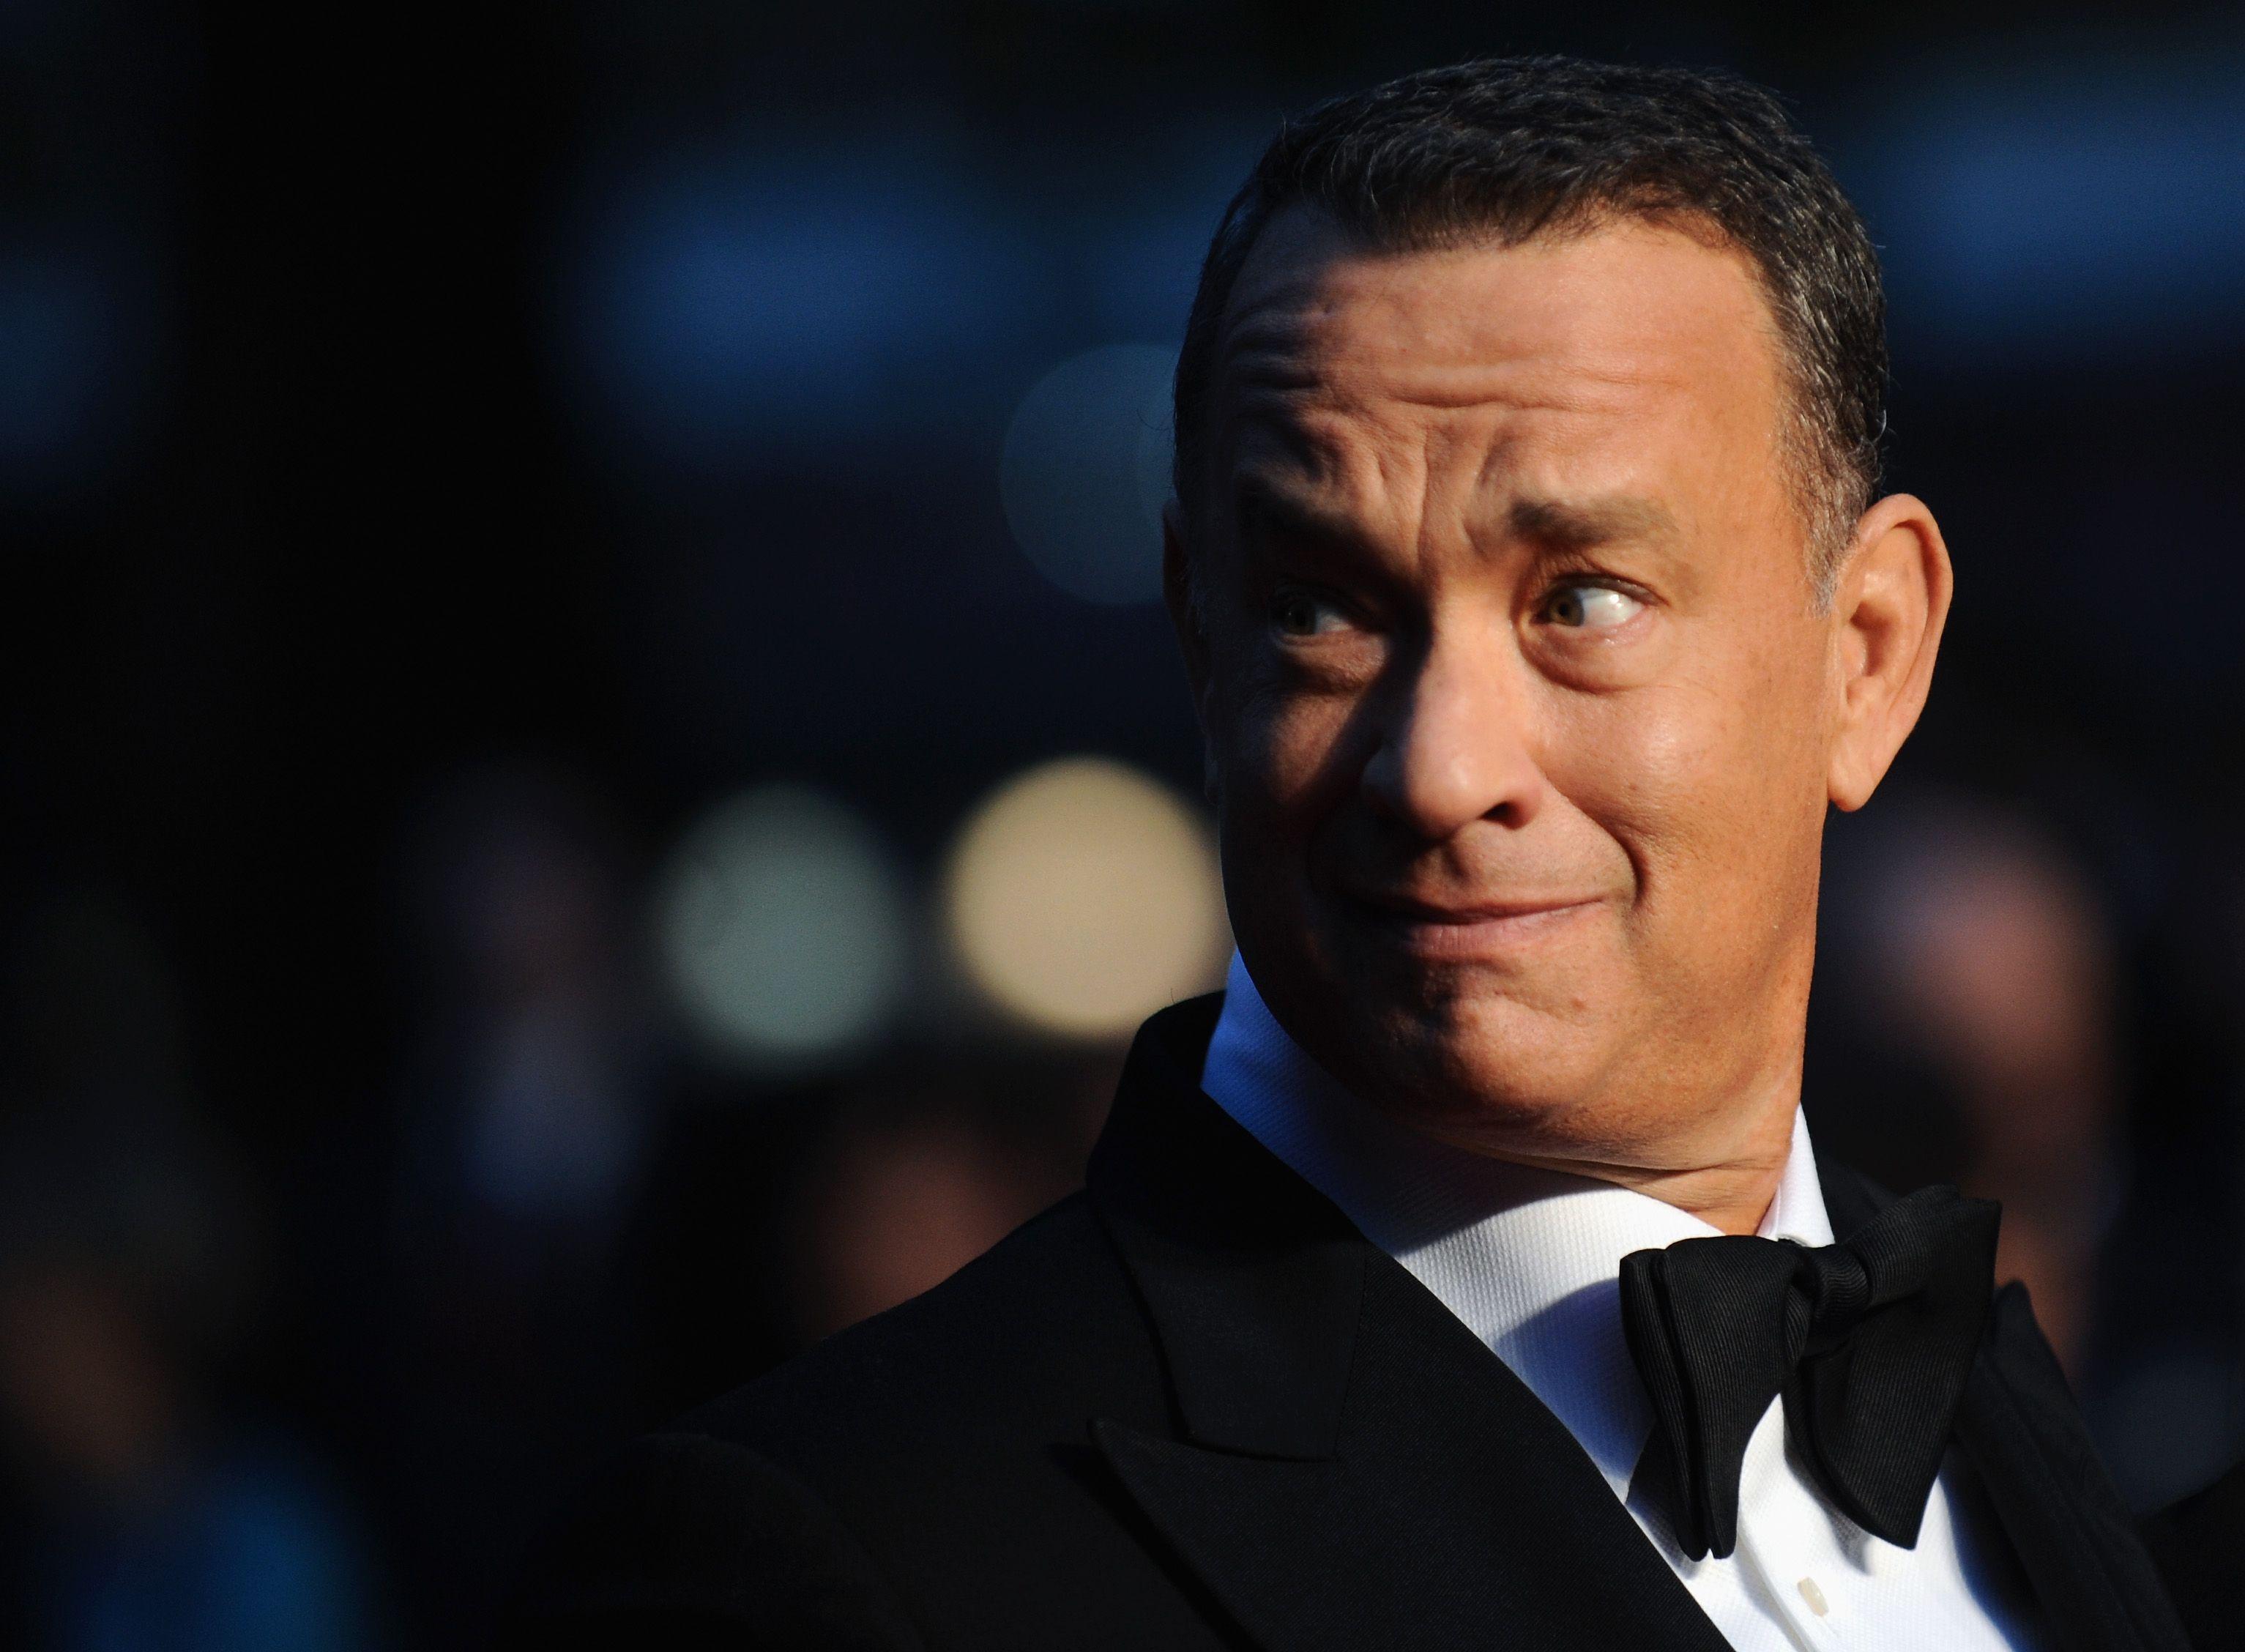 Tom Hanks Wallpaper High Resolution and Quality Download